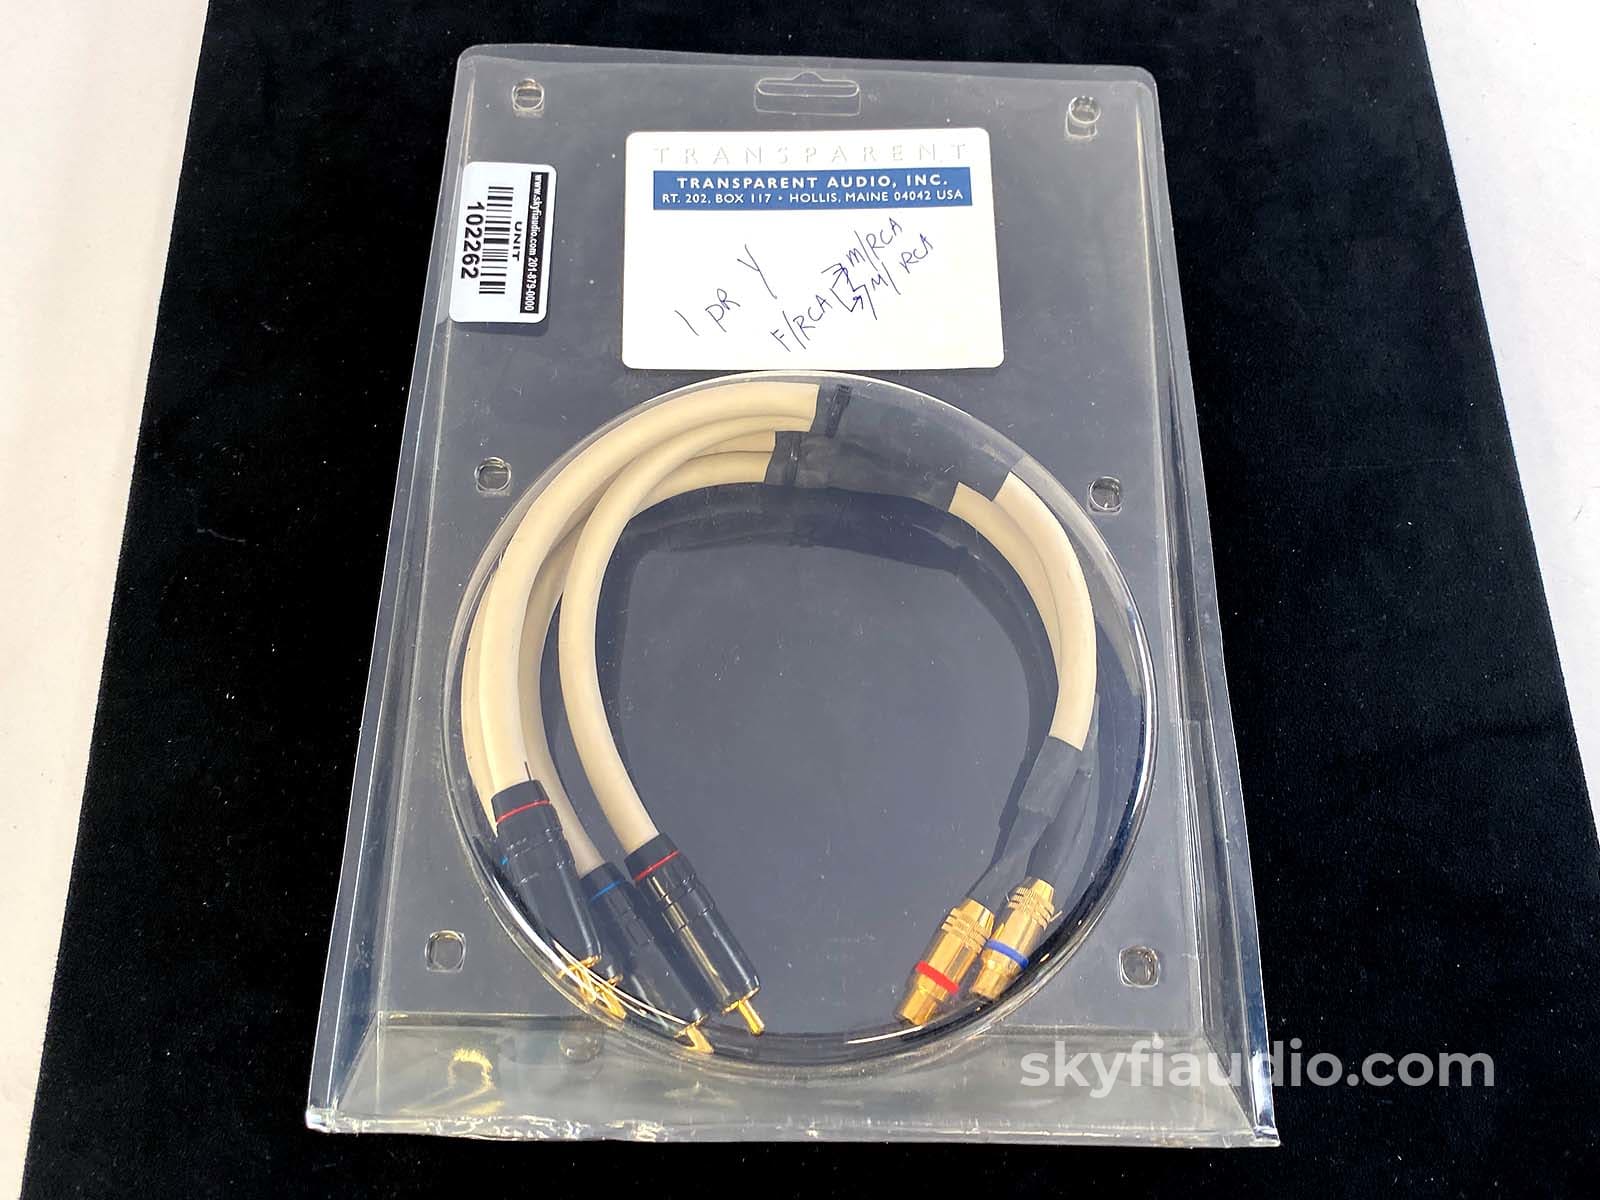 Transparent Audio - Rare Y-Splitter Rca Cables New Old Stock (Nos)!